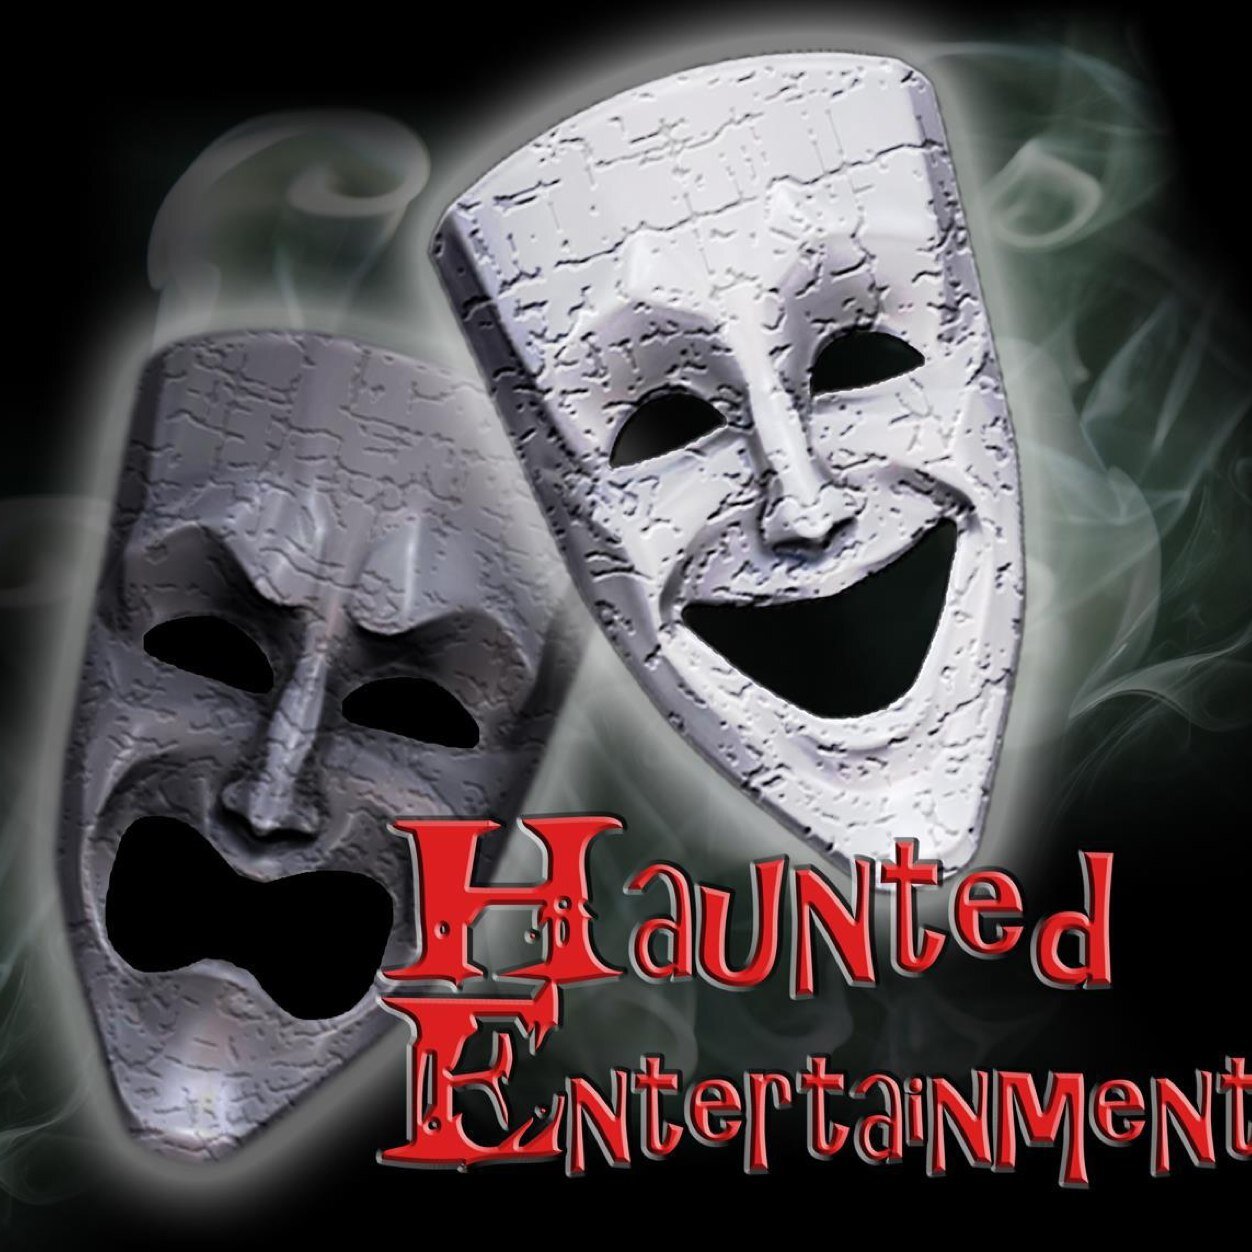 The place to go for Haunted Events and Talent! Please see our Facebook Page for event info! https://t.co/oqkE2gxtYj